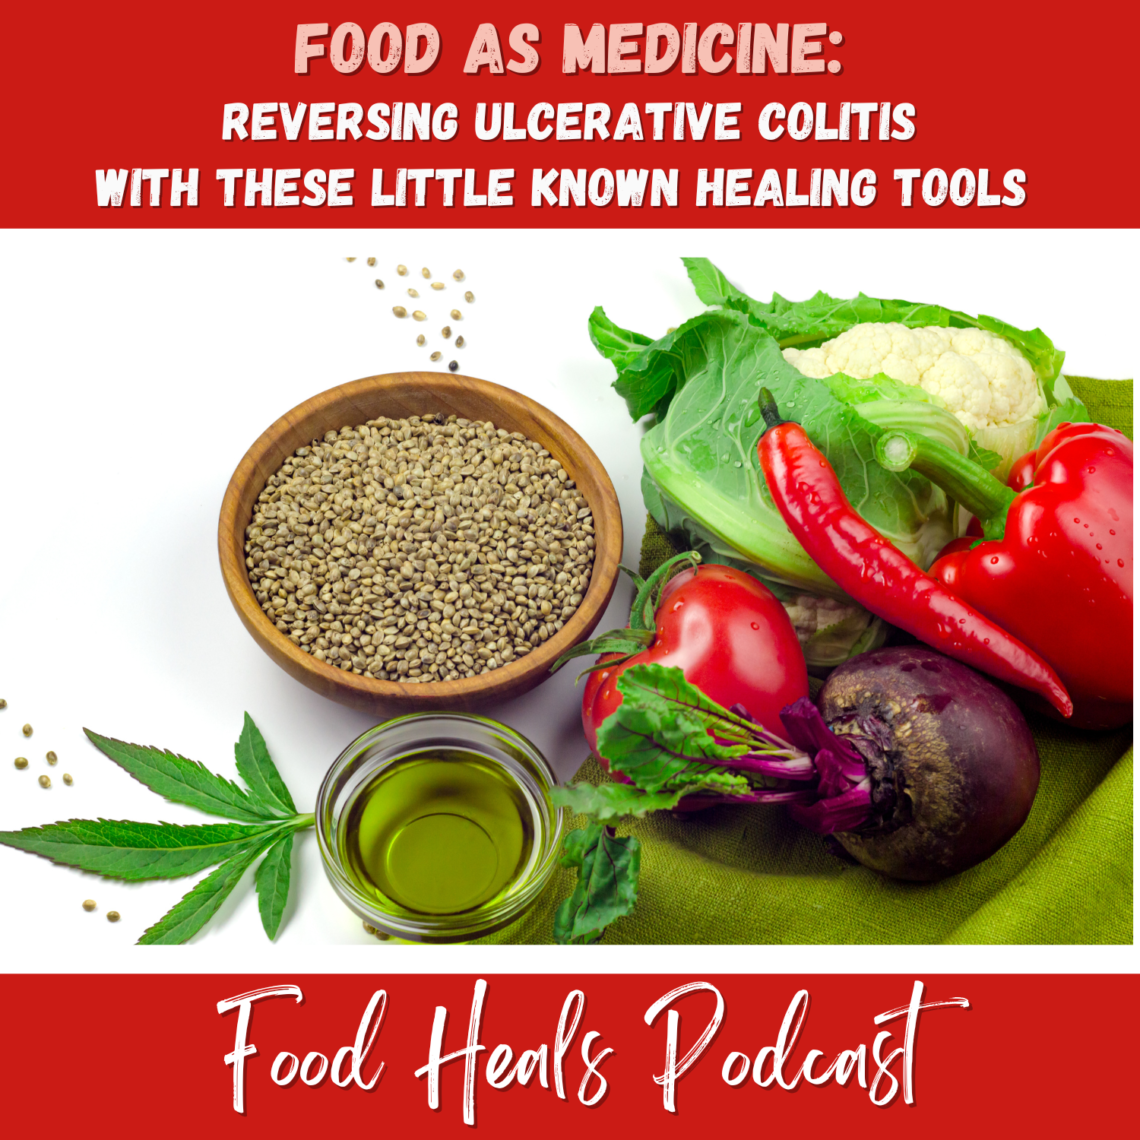 Food as Medicine: Reversing Ulcerative Colitis With These Little Known Healing Tools